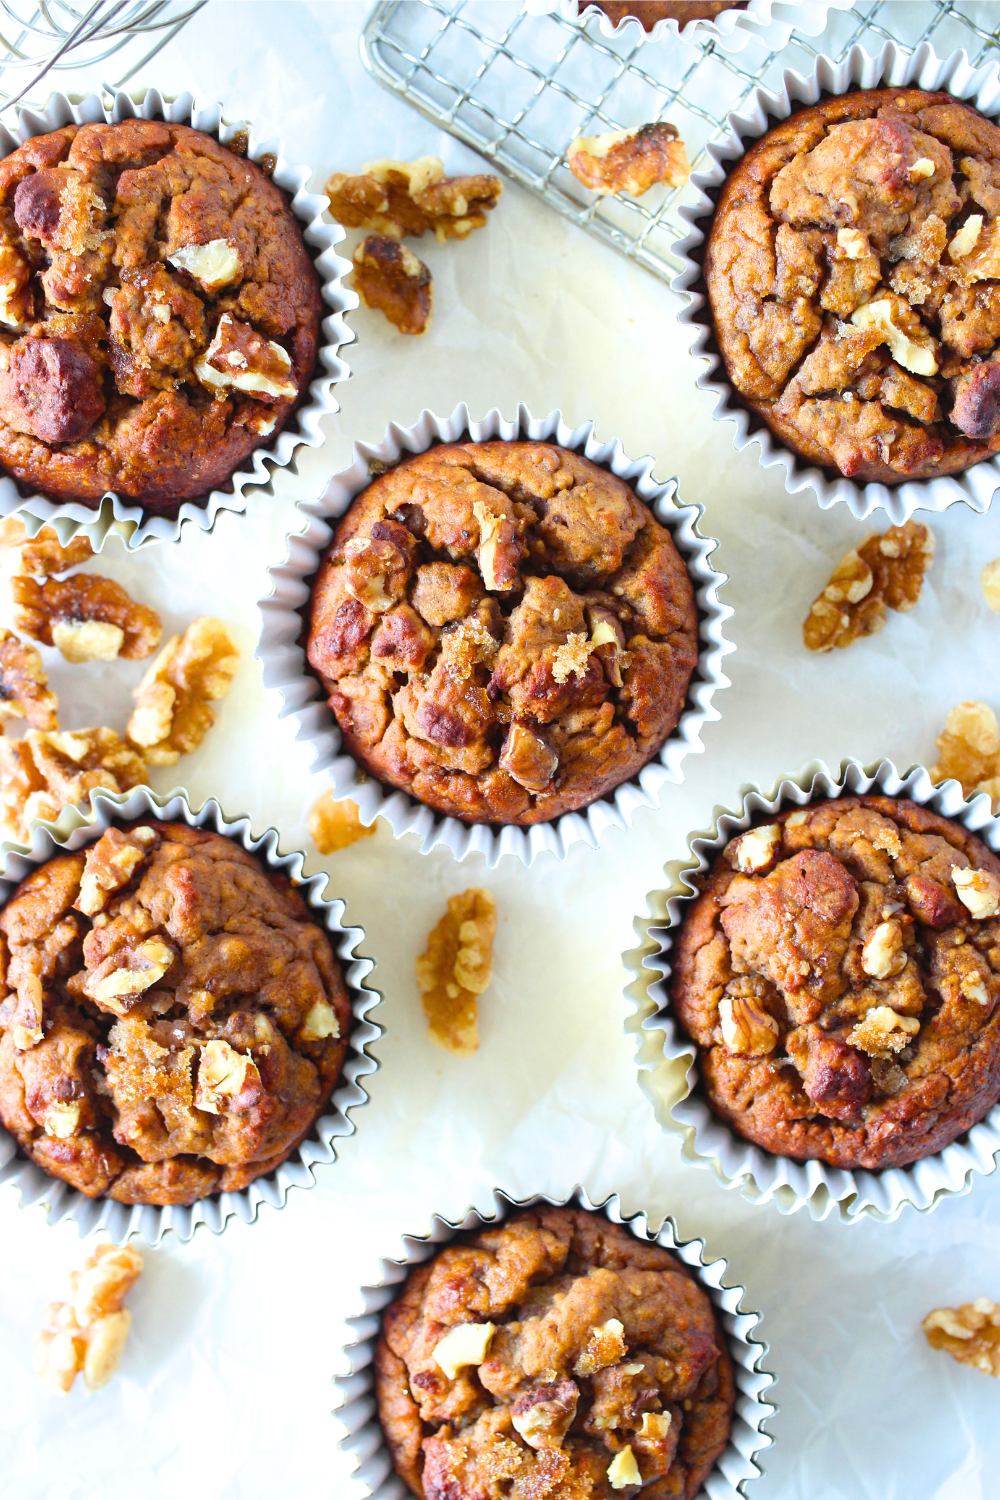 sugar-free banana muffins after being baked with walnuts scattered around the low calorie muffins